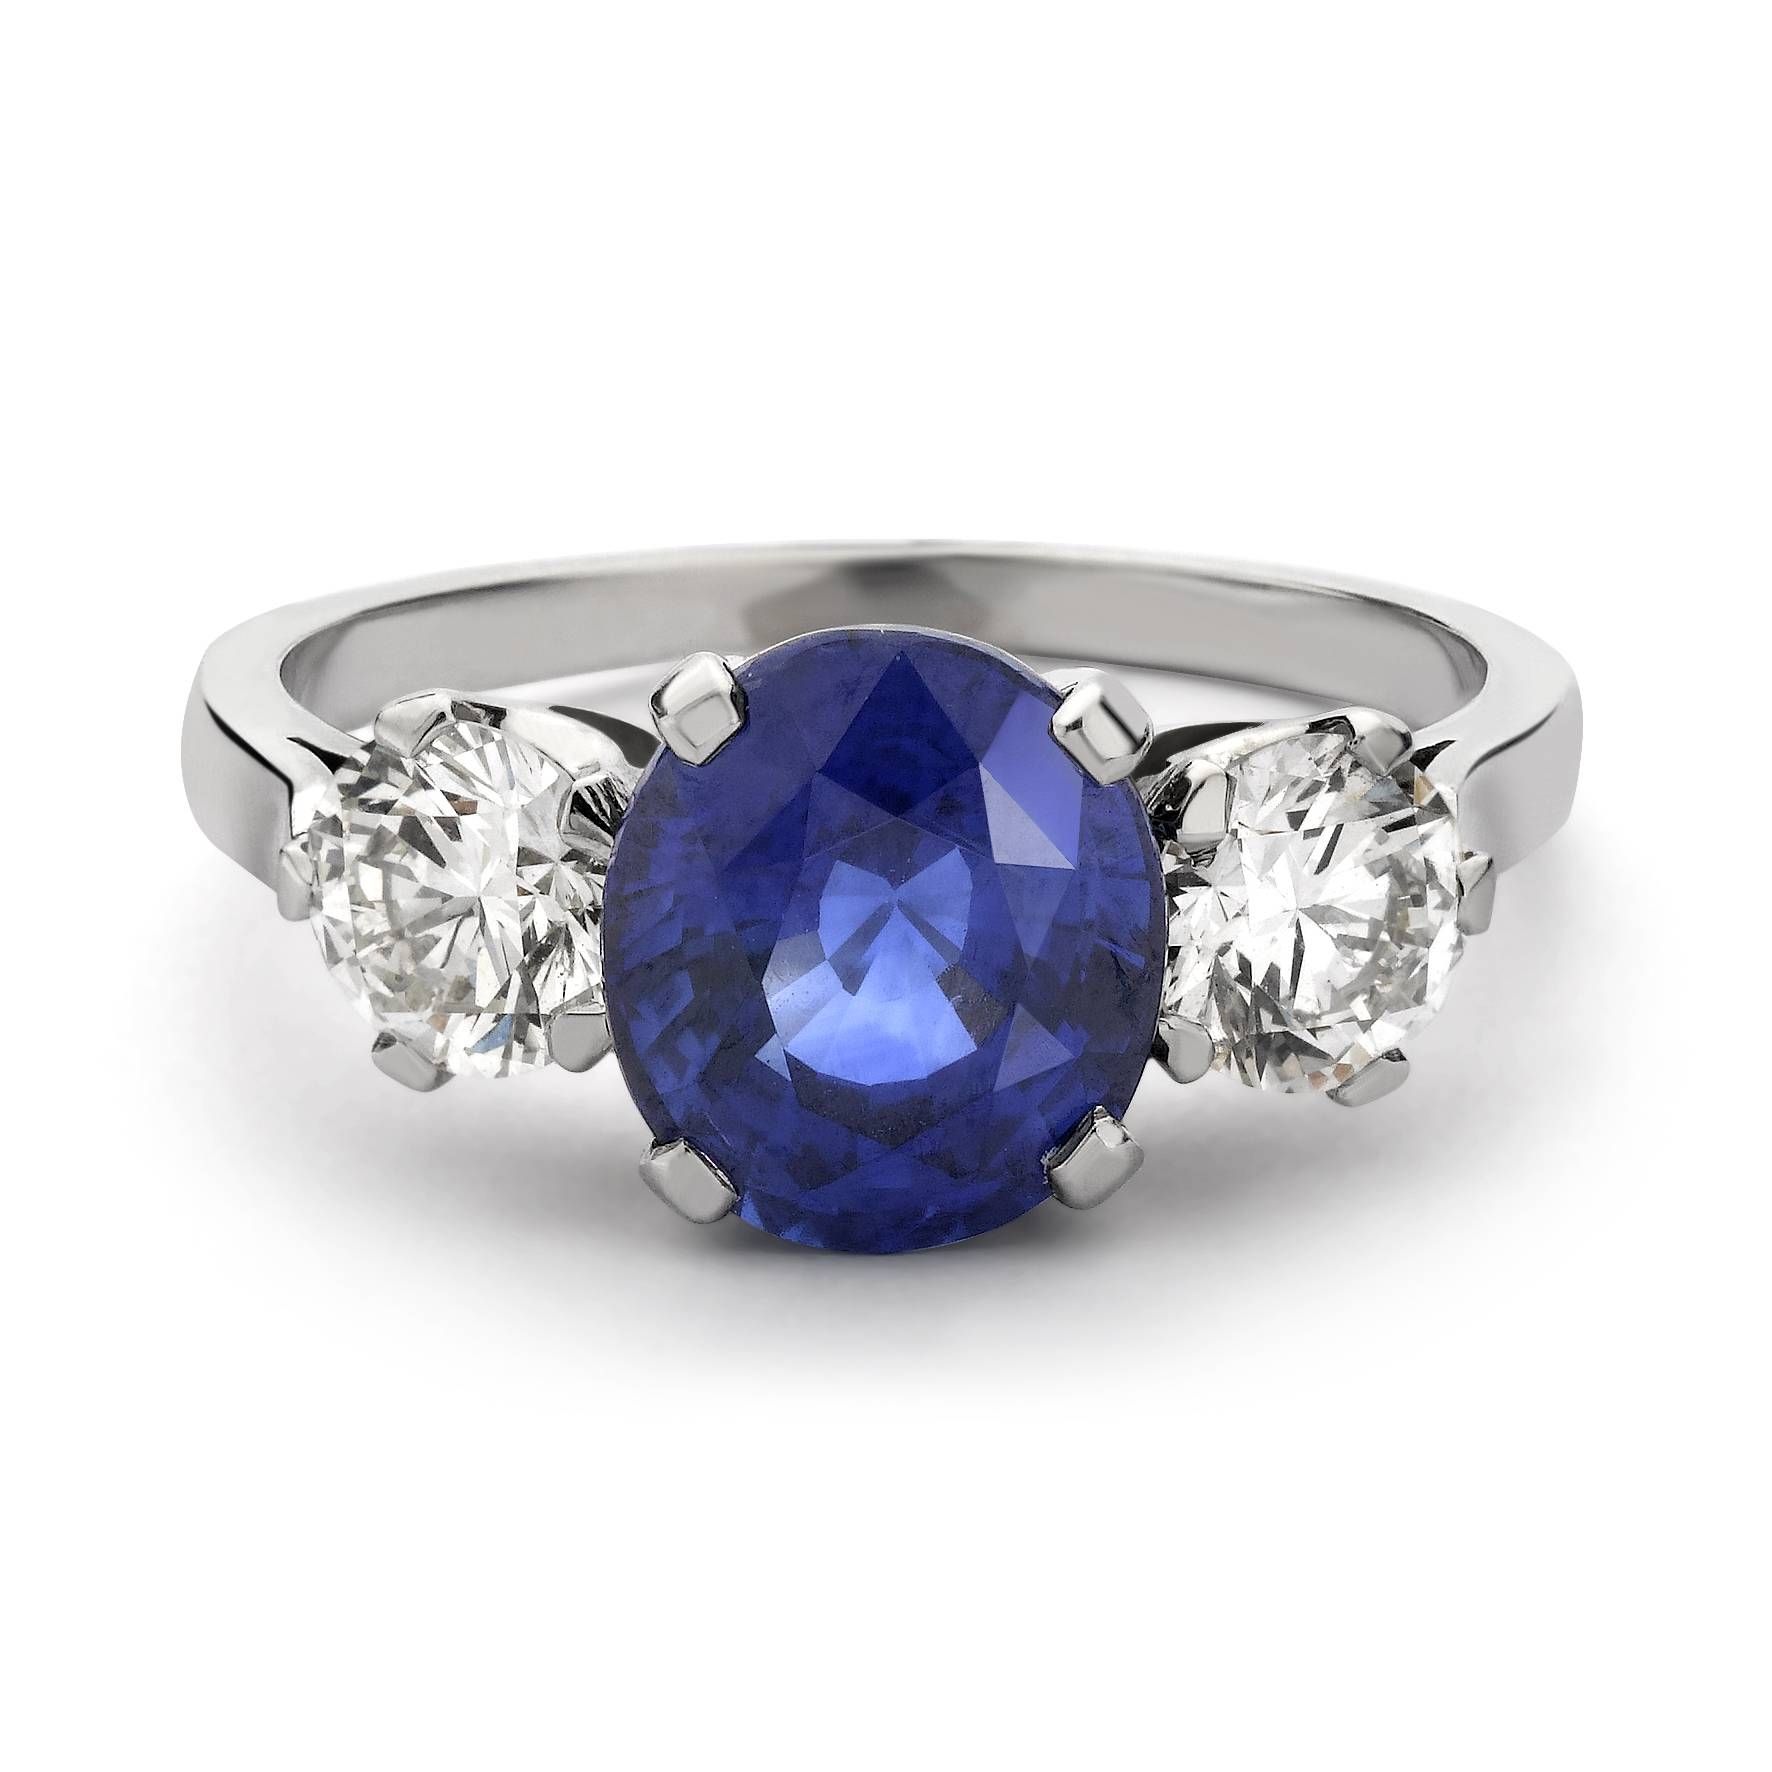 Engagement Rings : Sapphire Diamond Eternity Ring 18k White Gold With Regard To Sapphire And Diamond Wedding Rings (View 8 of 15)